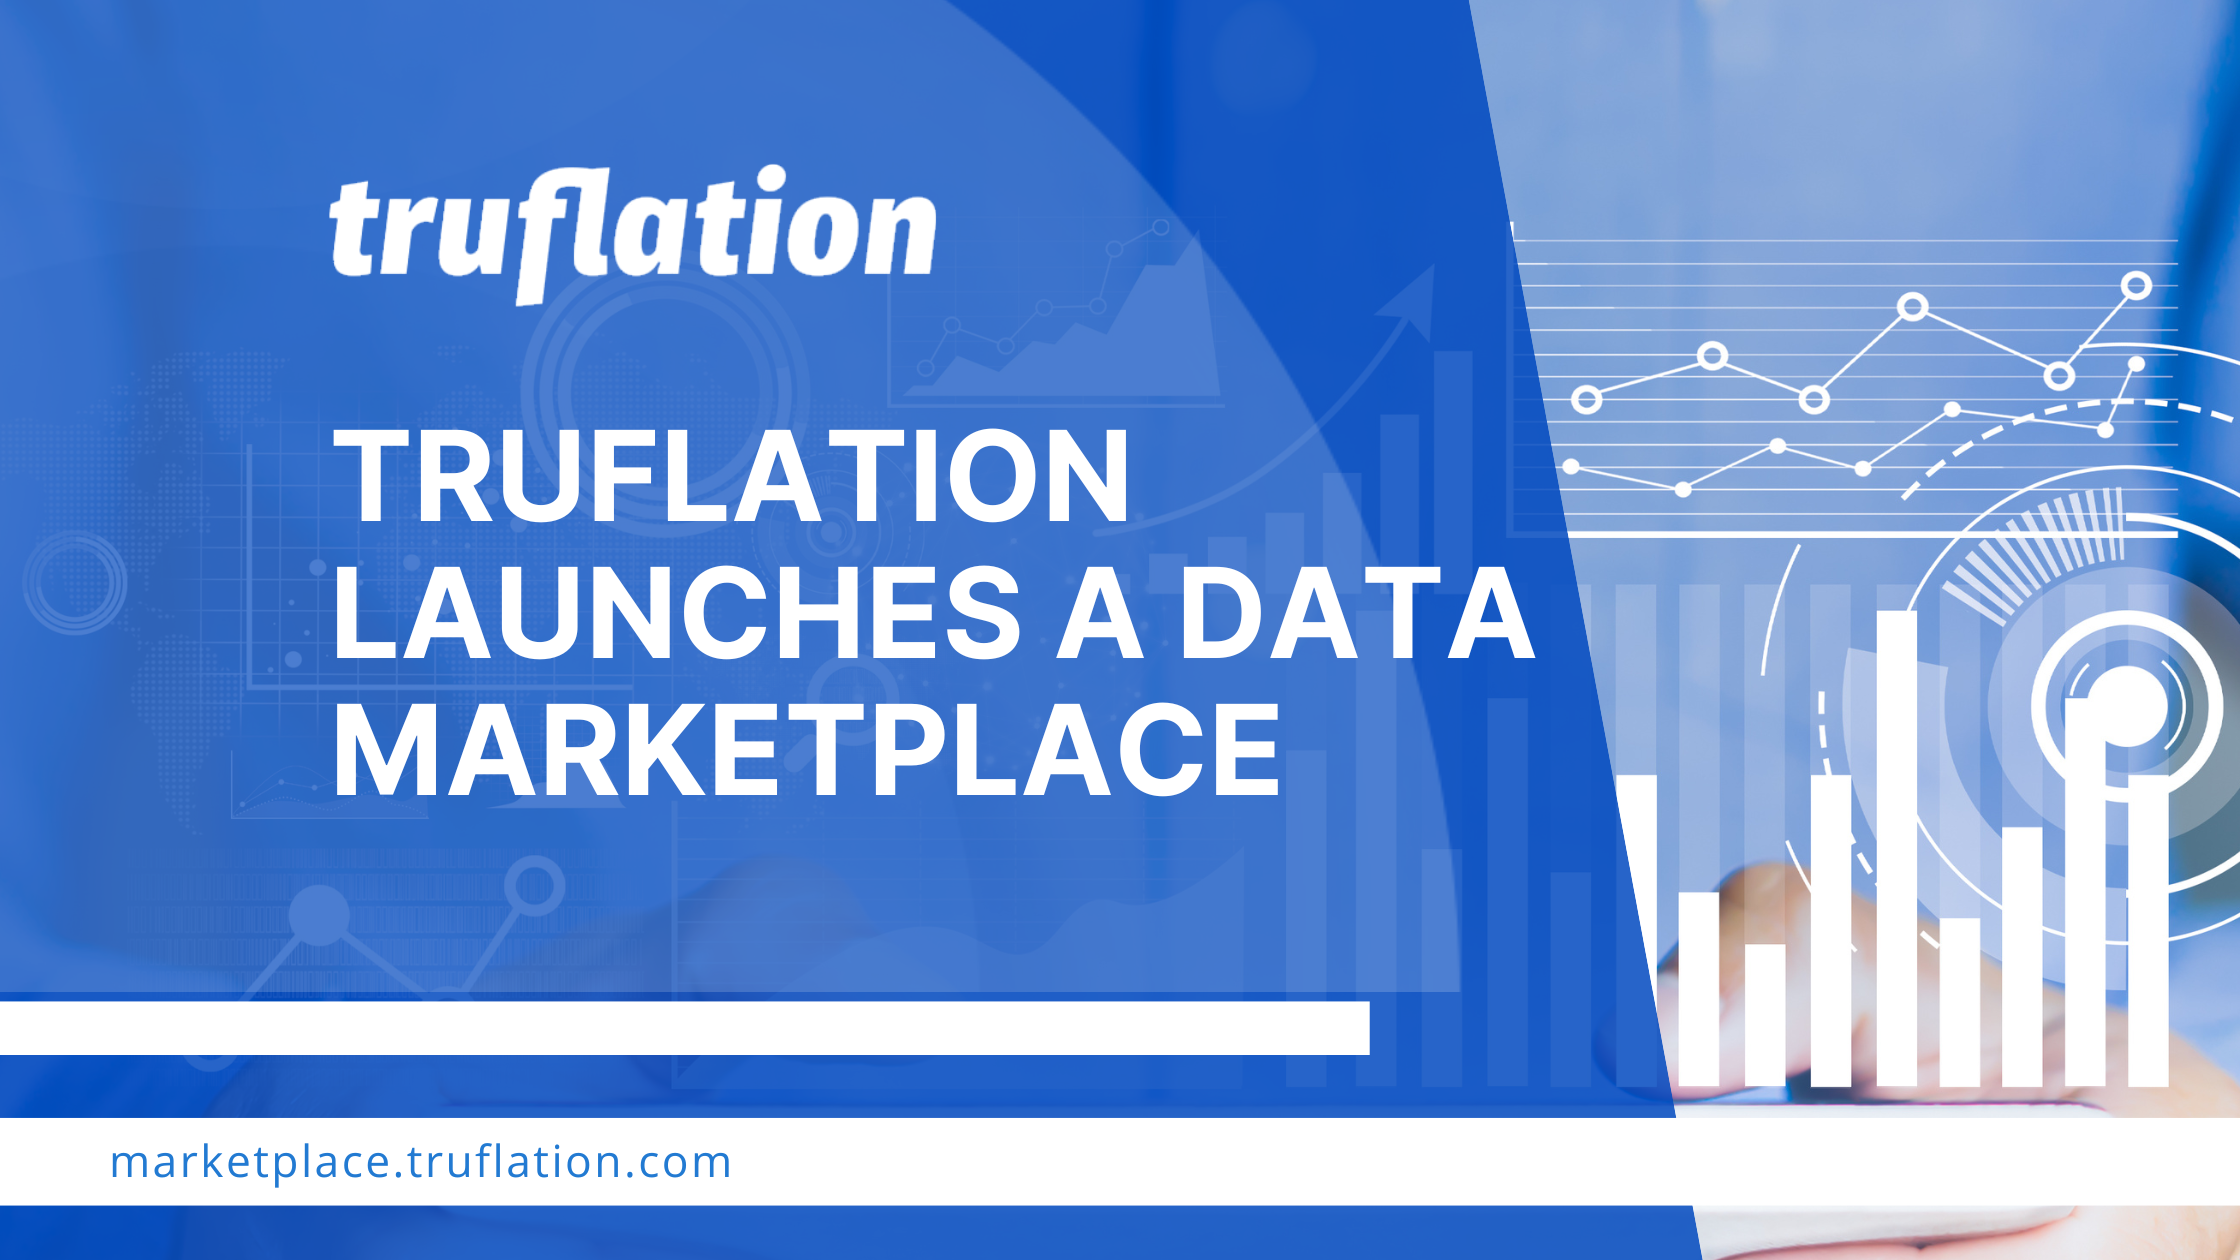 Truflation Launches a Data Marketplace.